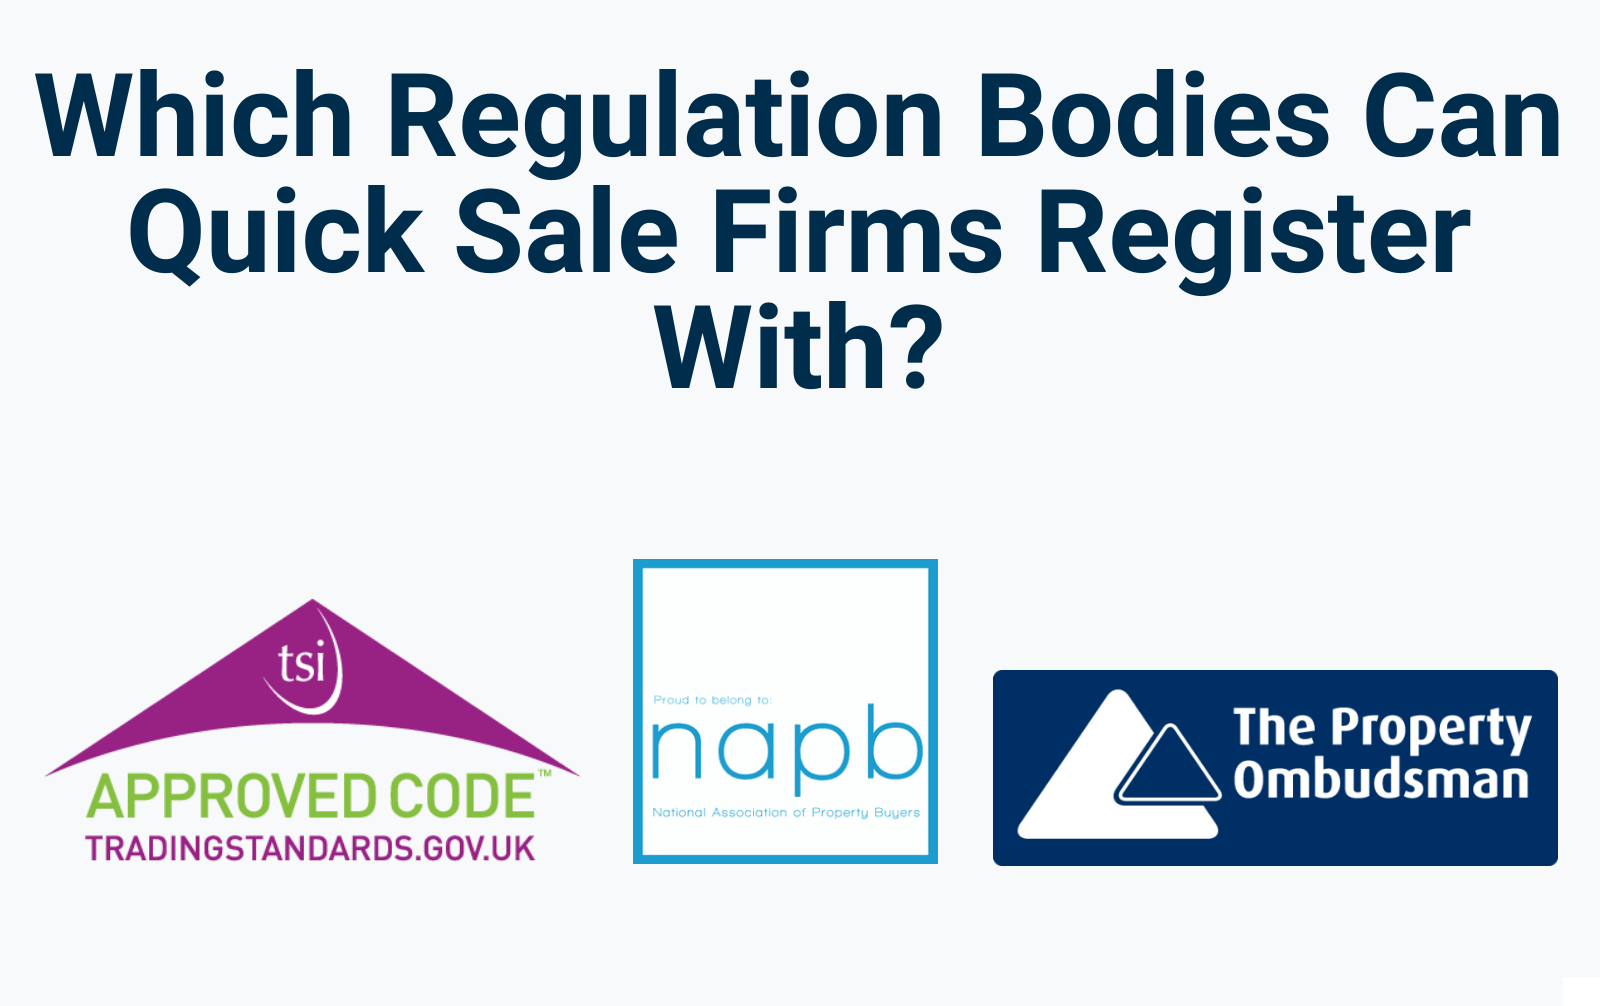 Which regulatory bodies should quick sale firms register with